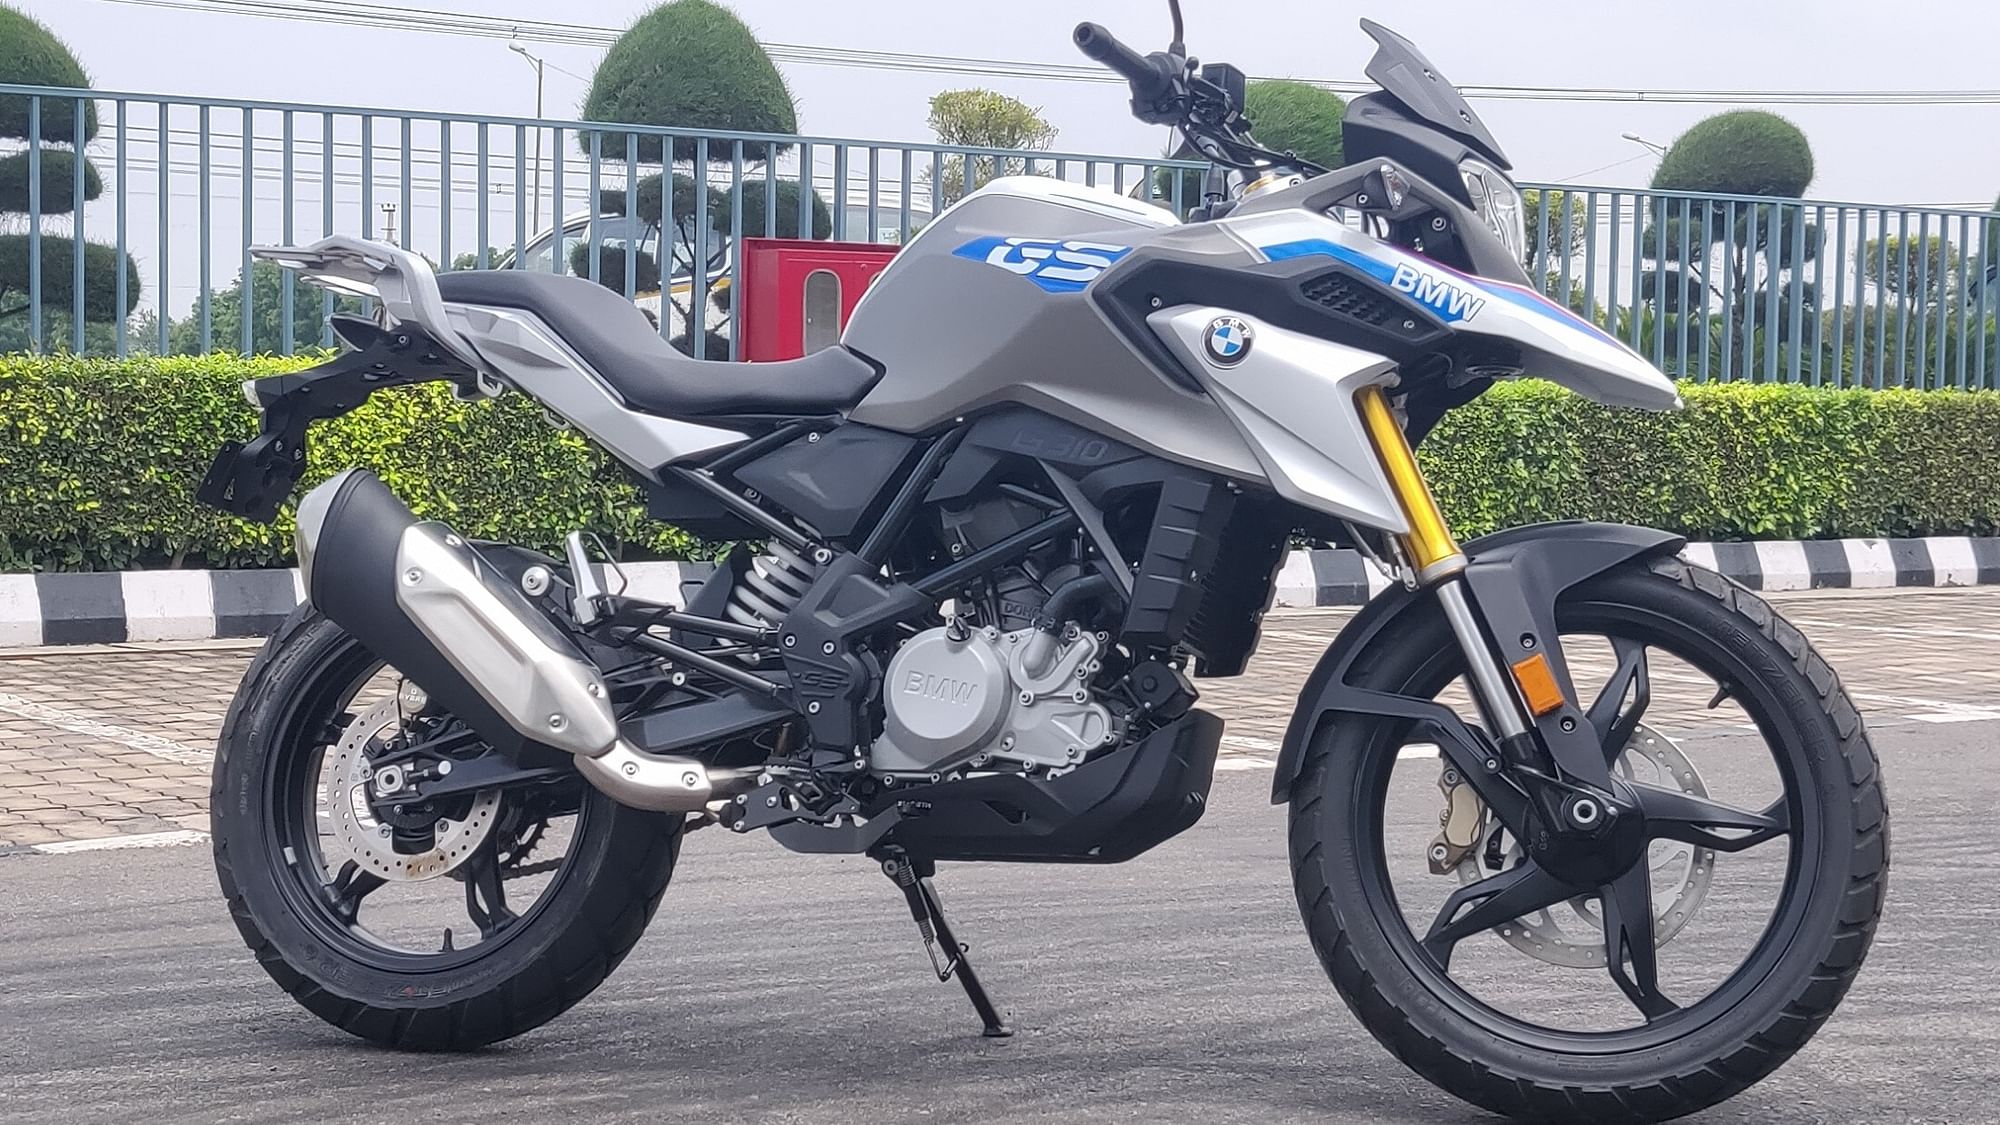 Ktm 390 Adventure Vs Bmw G310 Gs Price Features Comparison And More